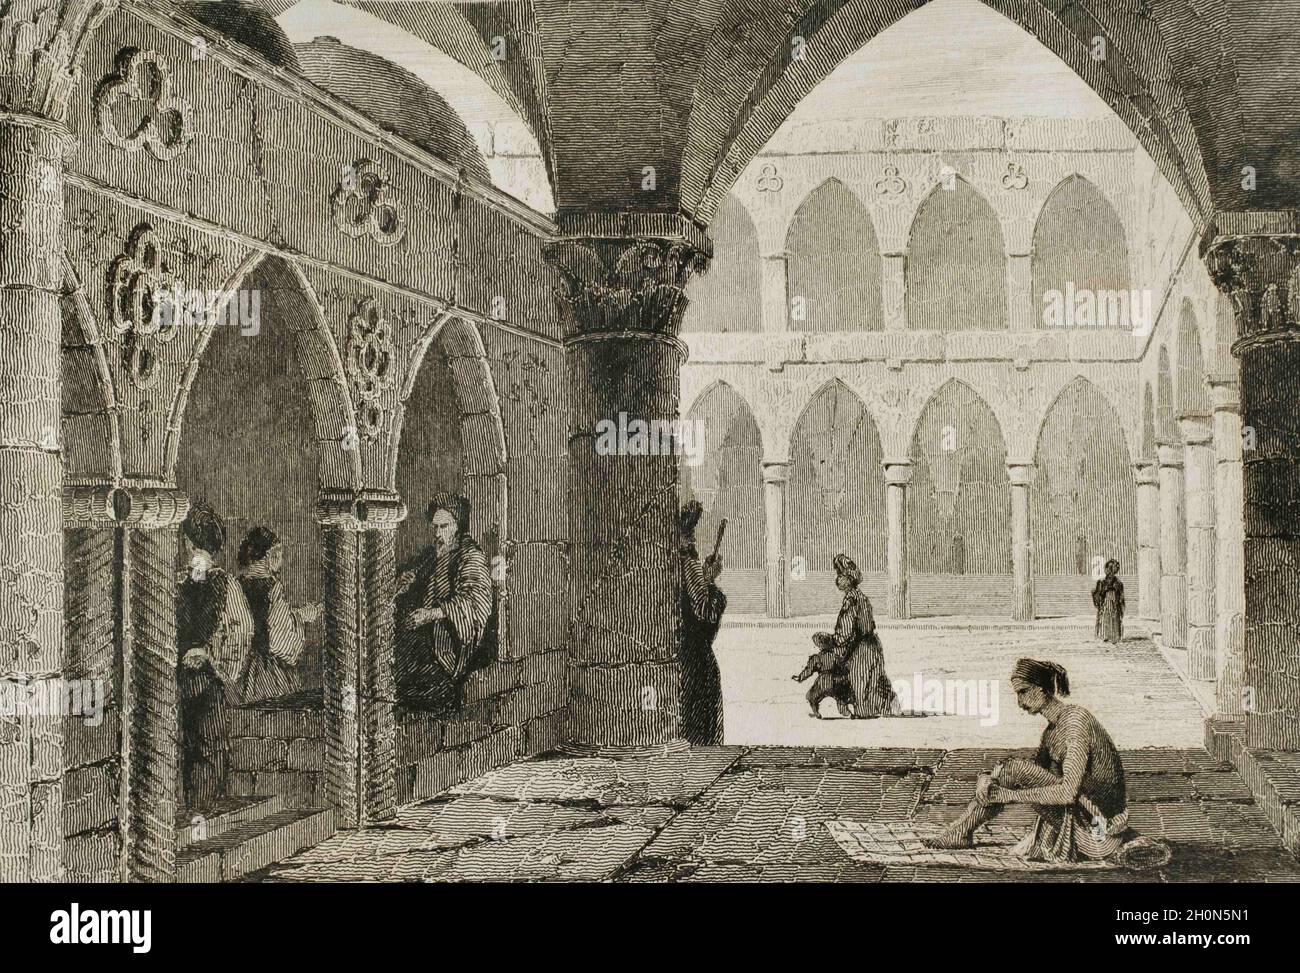 Ottoman domination. Acre (today Akko in northern territory of Israel). Bazaar at Saint Jean d'Acre. Engraving by Lemaitre, Vormser and Lepetit. Histor Stock Photo